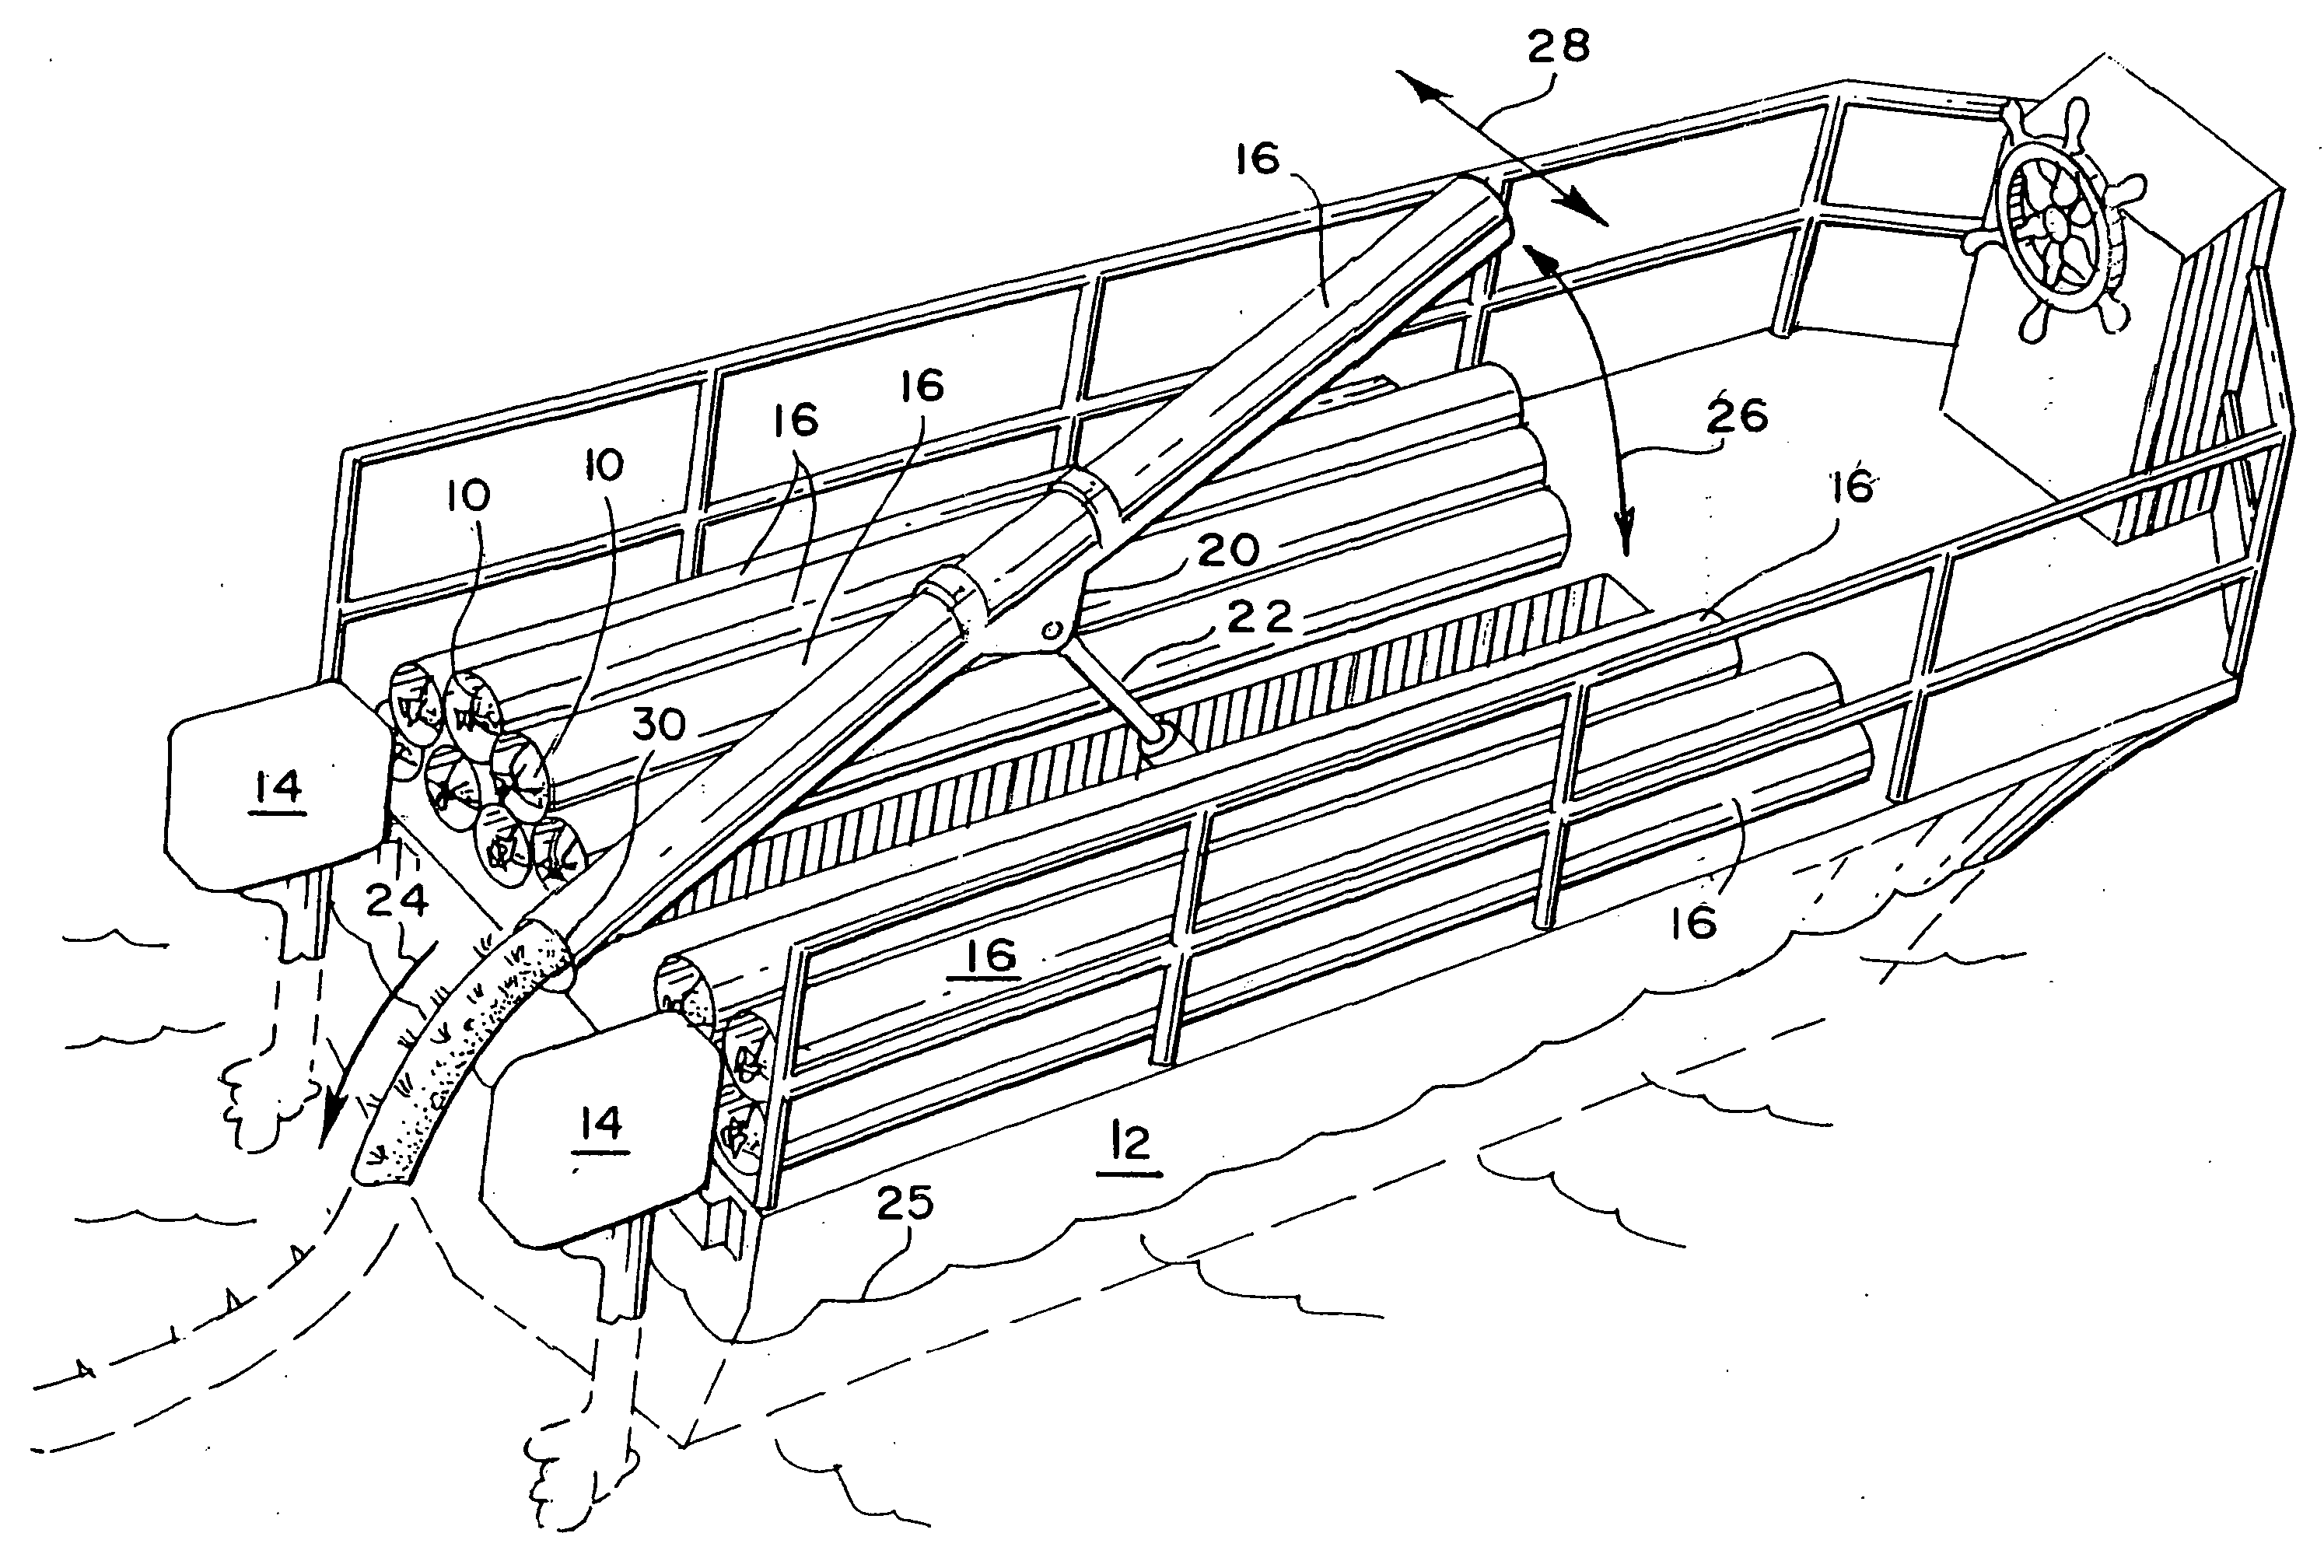 Process and related apparatus for repairing aquatic propeller scars